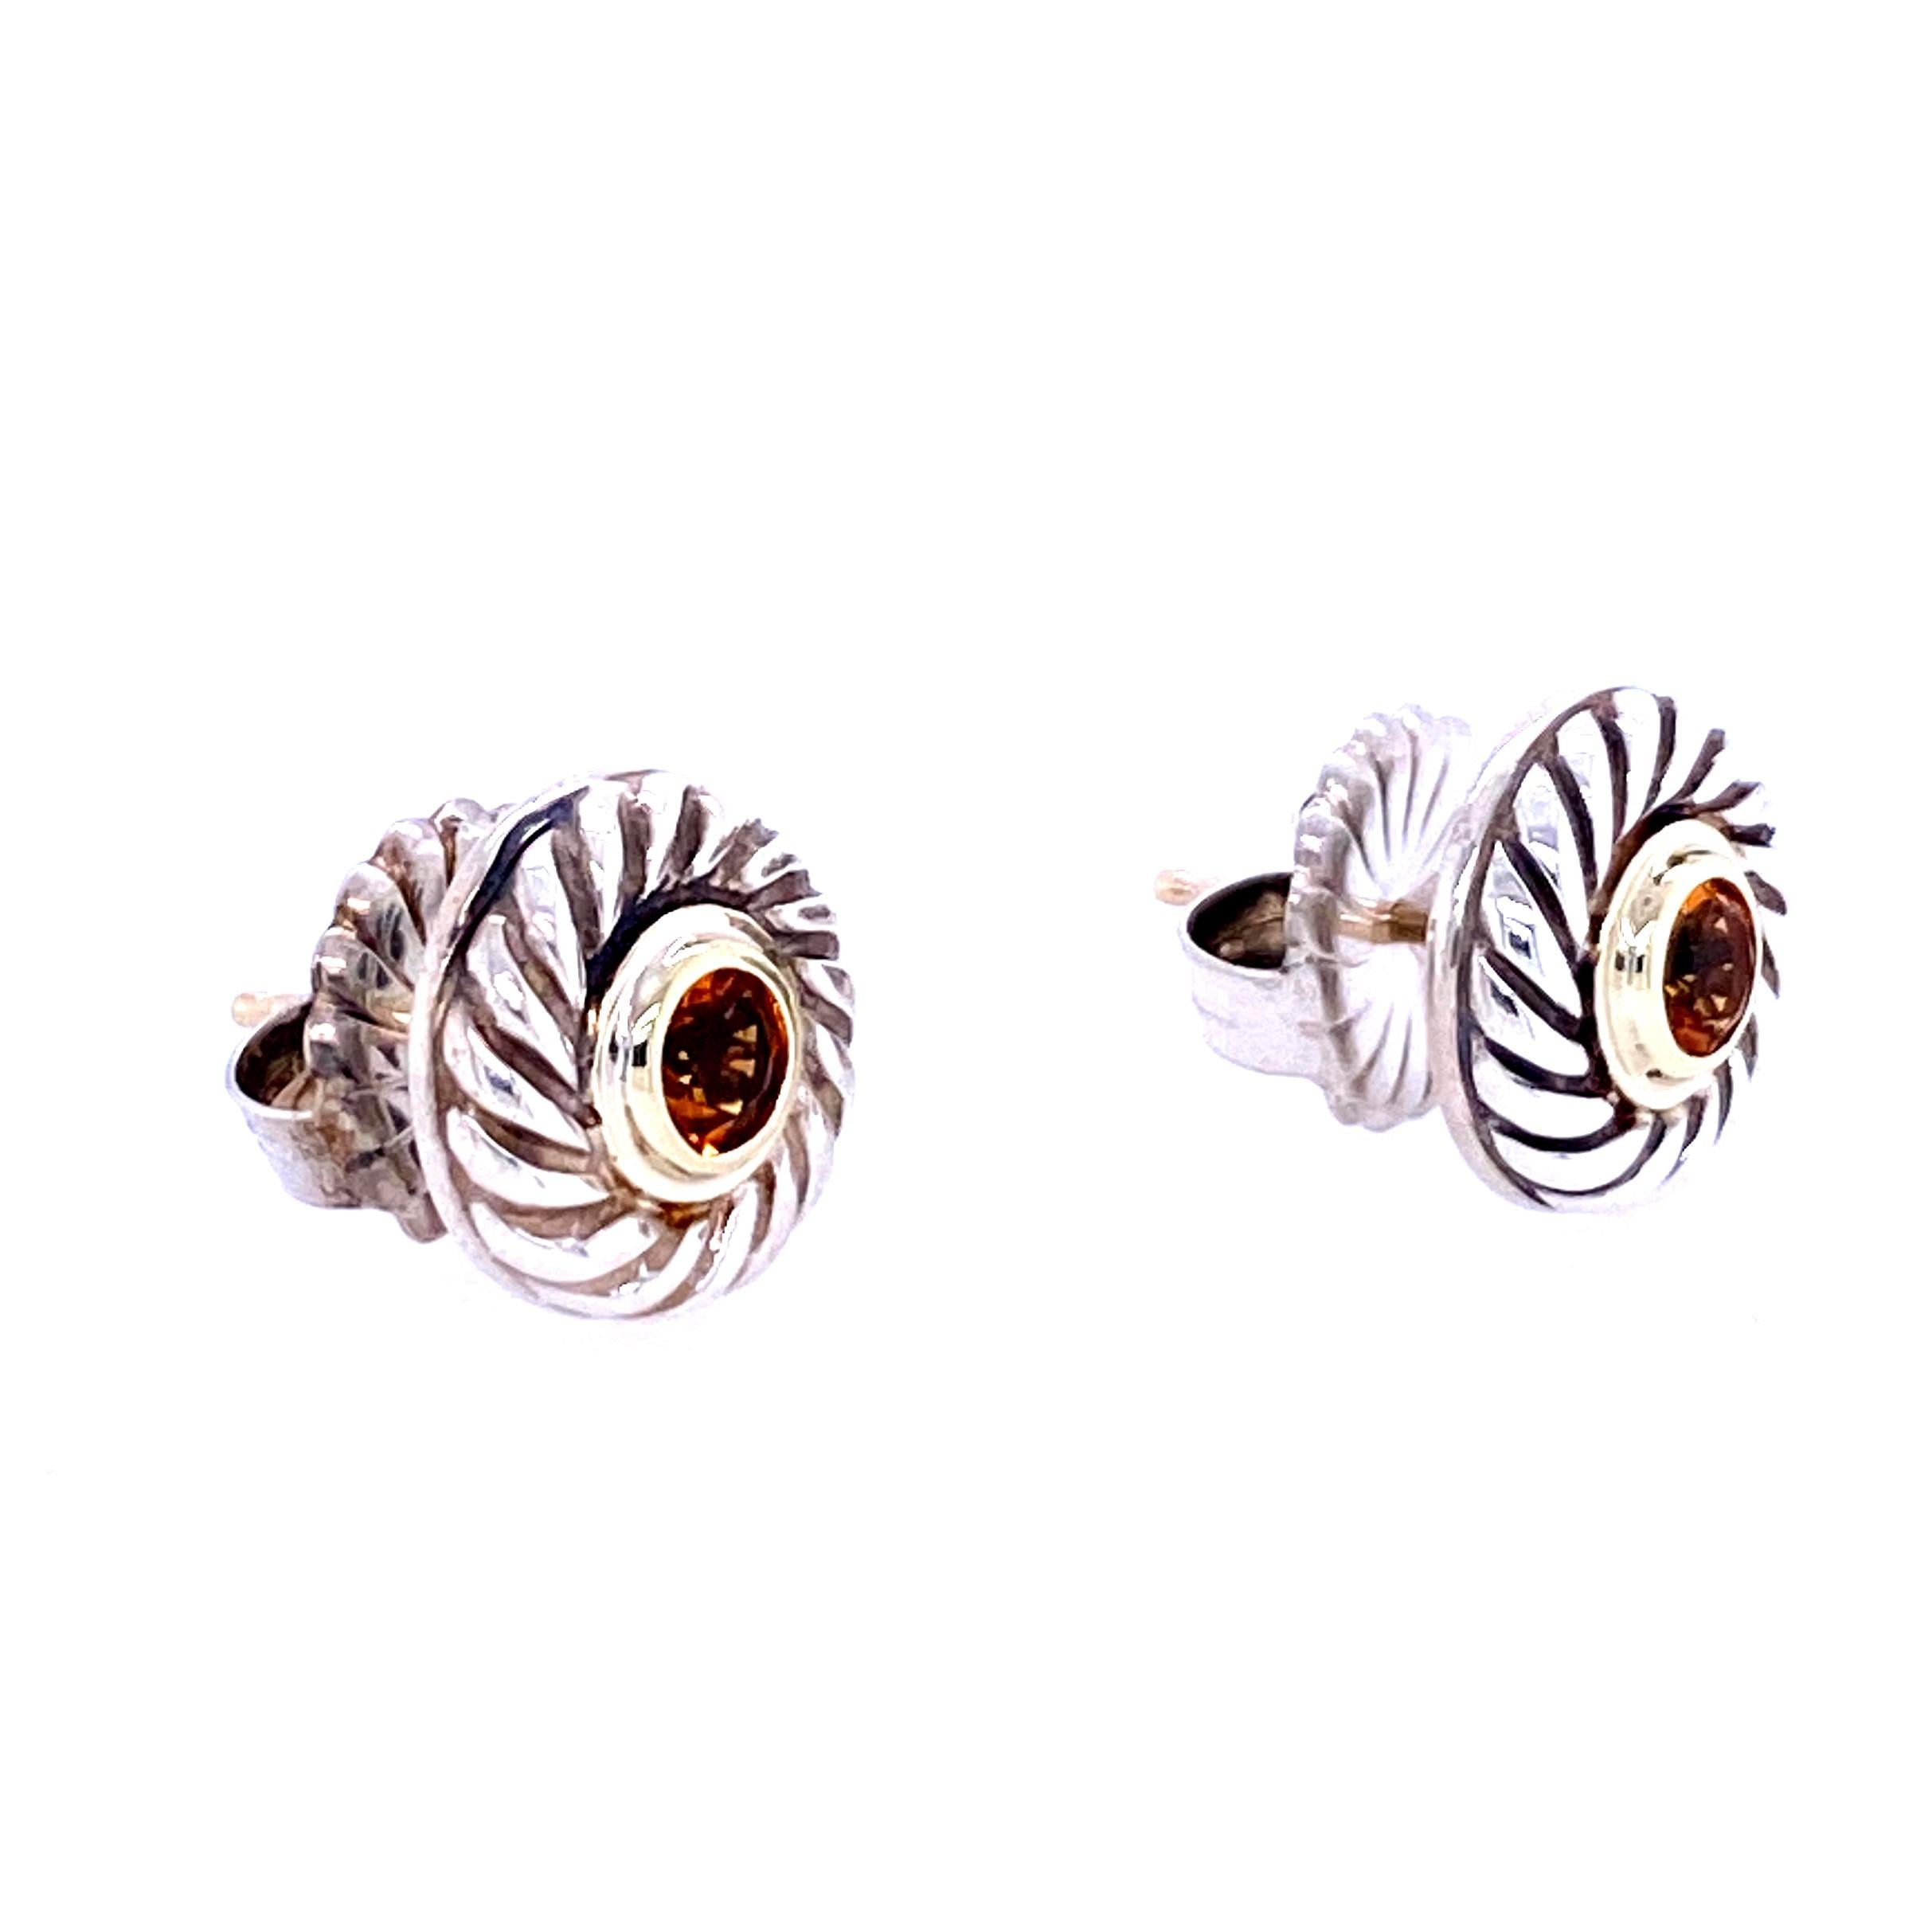 One pair of sterling silver (stamped 925 D.Y. 585) David Yurman earrings, each set with one 4mm round citrine in a yellow gold bezel setting.  The earrings measure 11.5mm in diameter and have friction fat backs and posts.  